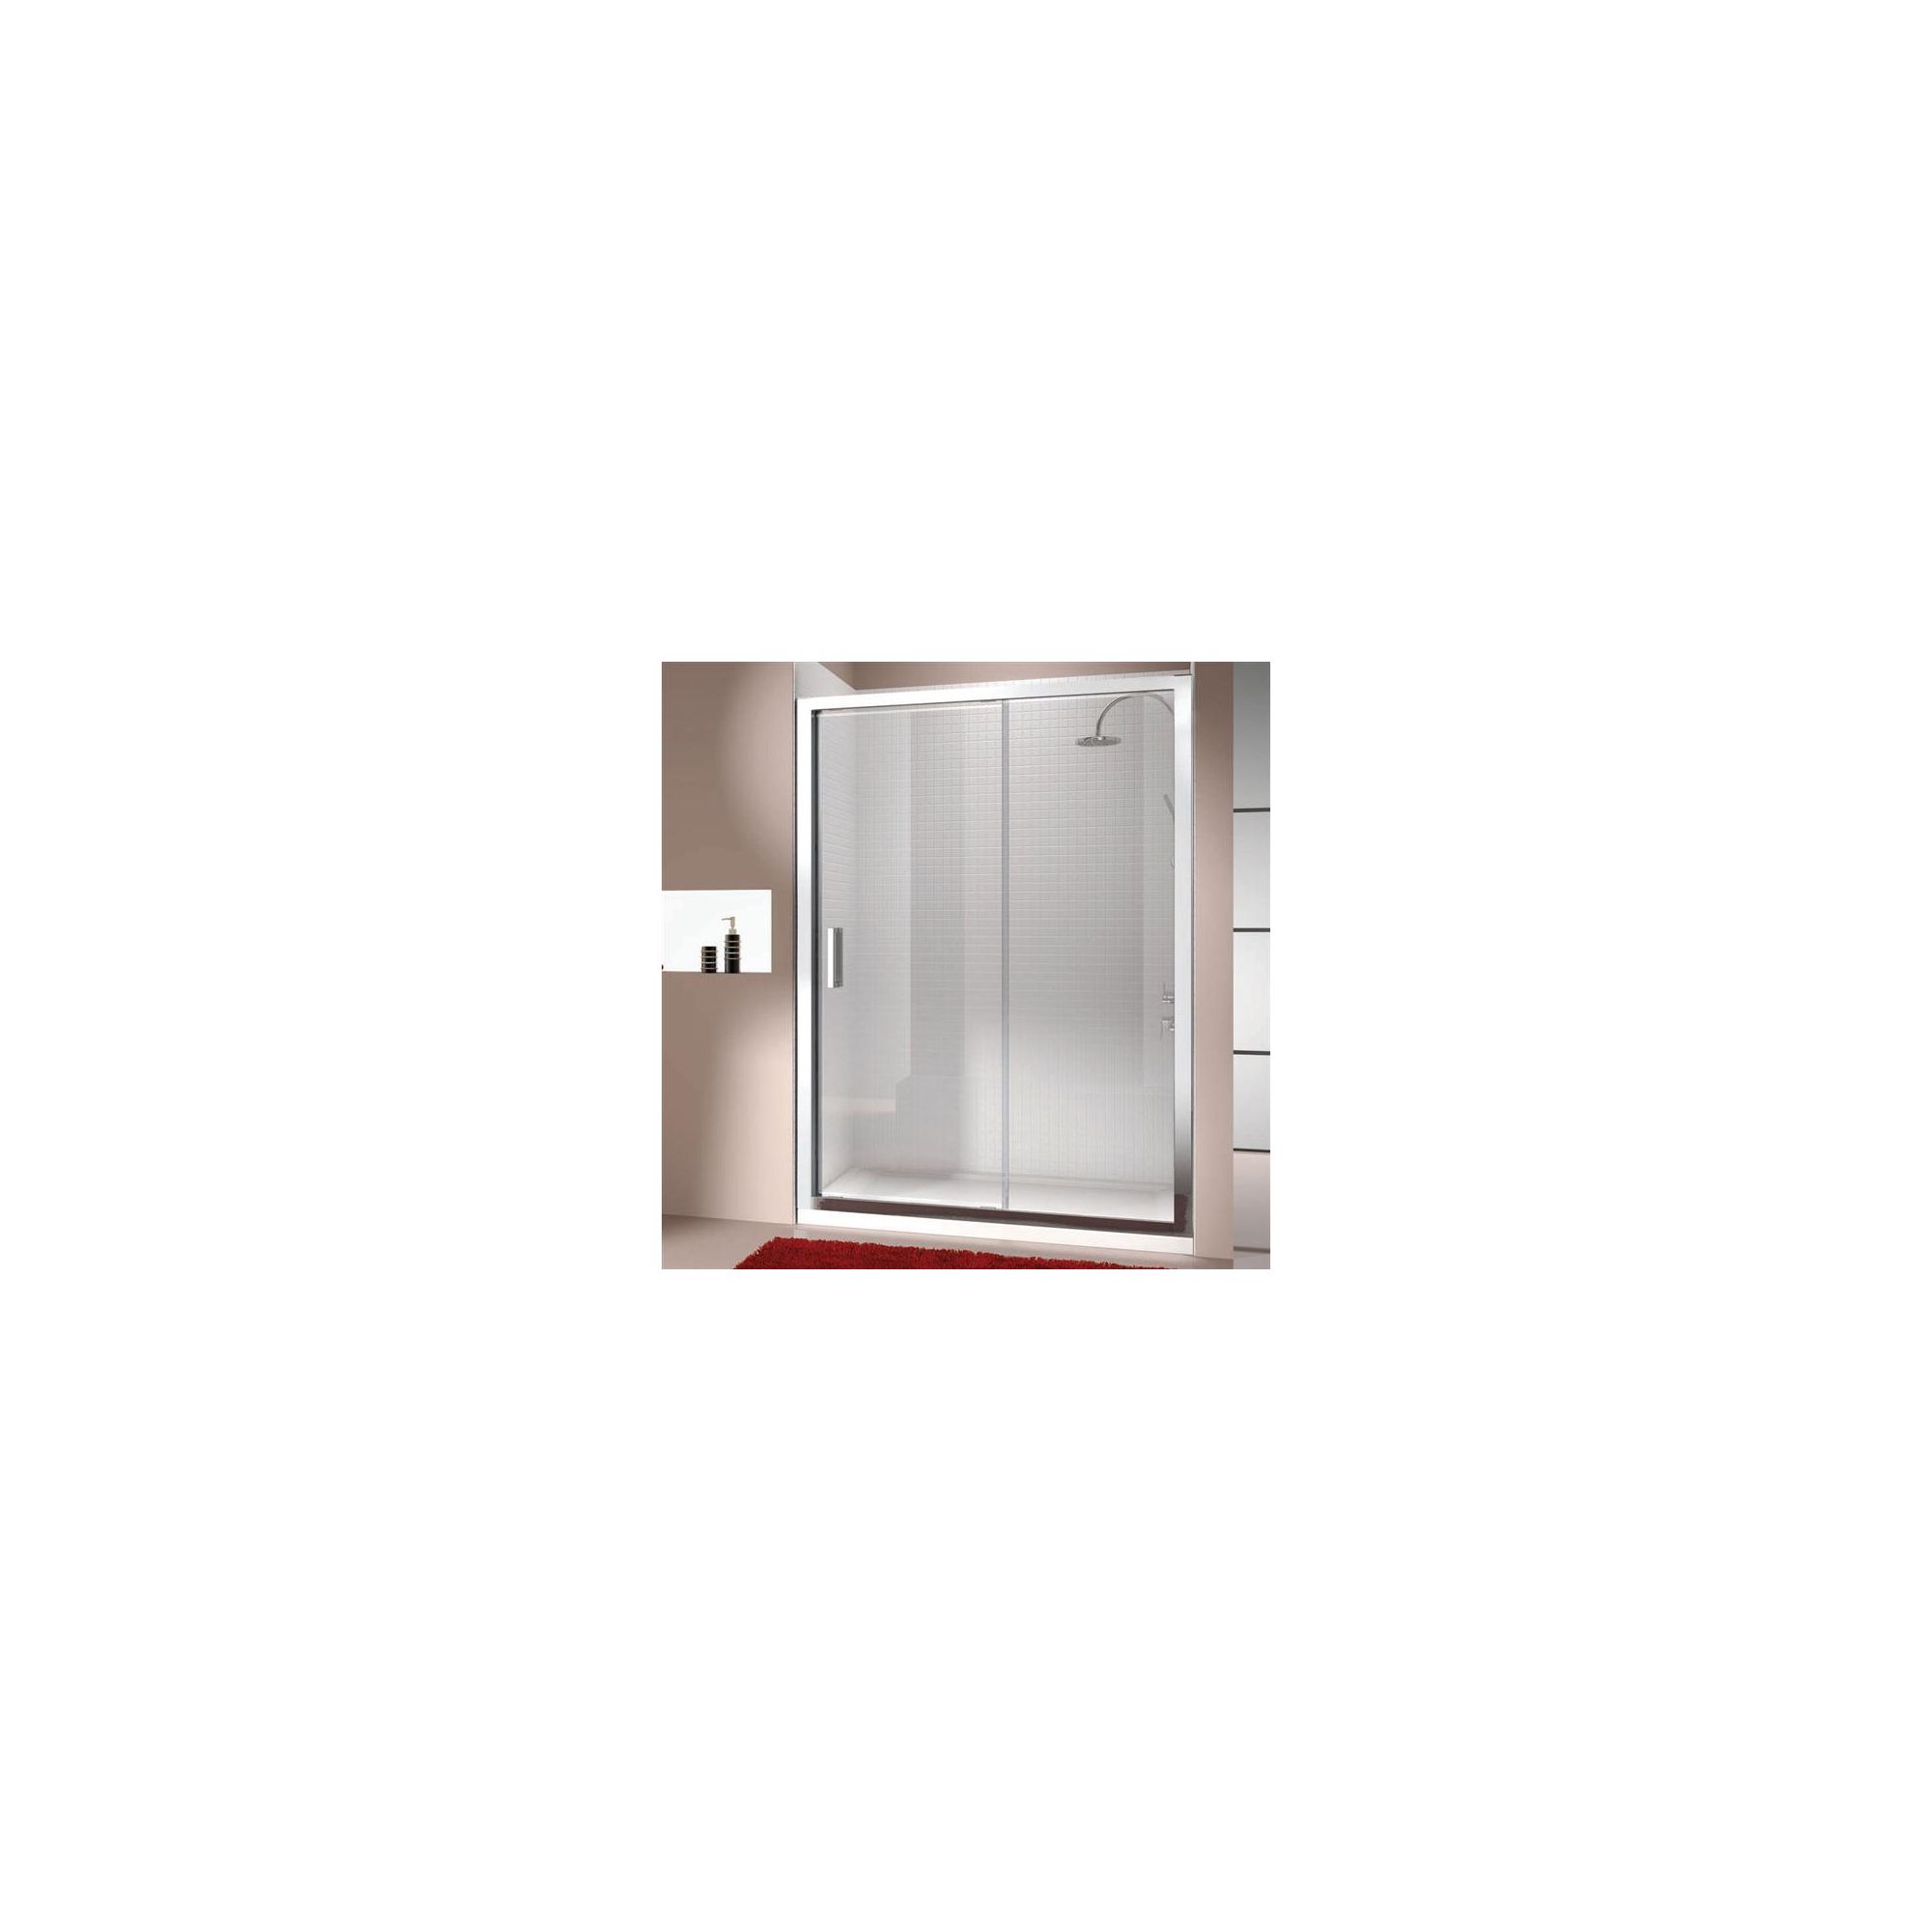 Merlyn Vivid Eight Sliding Door Alcove Shower Enclosure, 1100mm x 800mm, Low Profile Tray, 8mm Glass at Tesco Direct